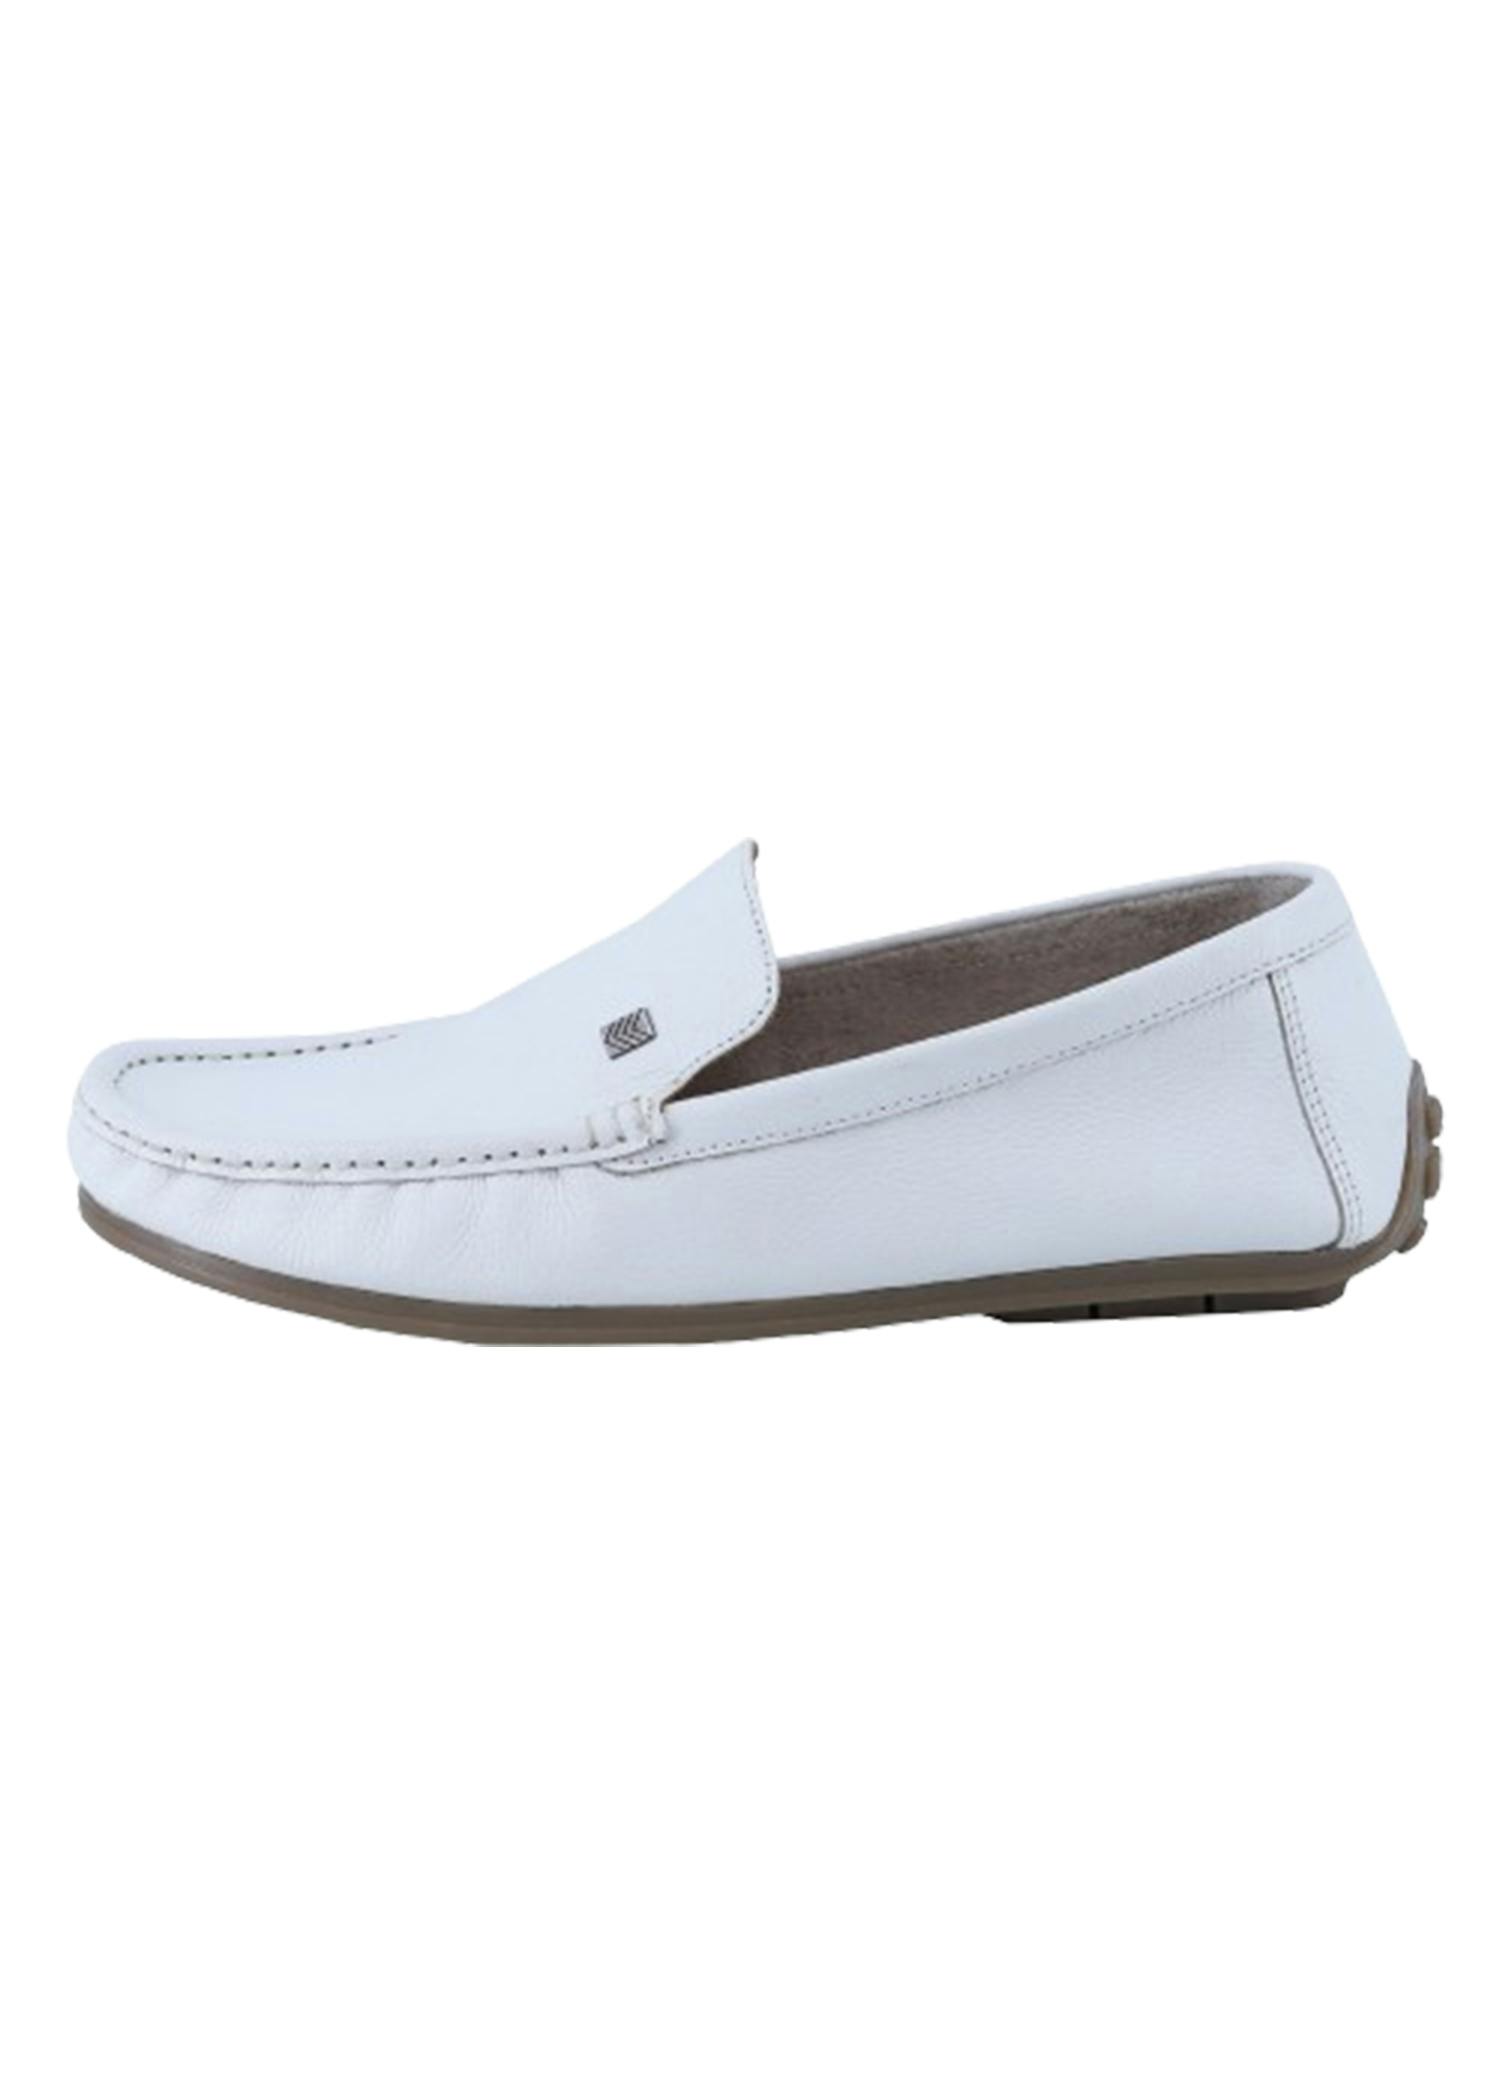 deer mens shoes white color cover